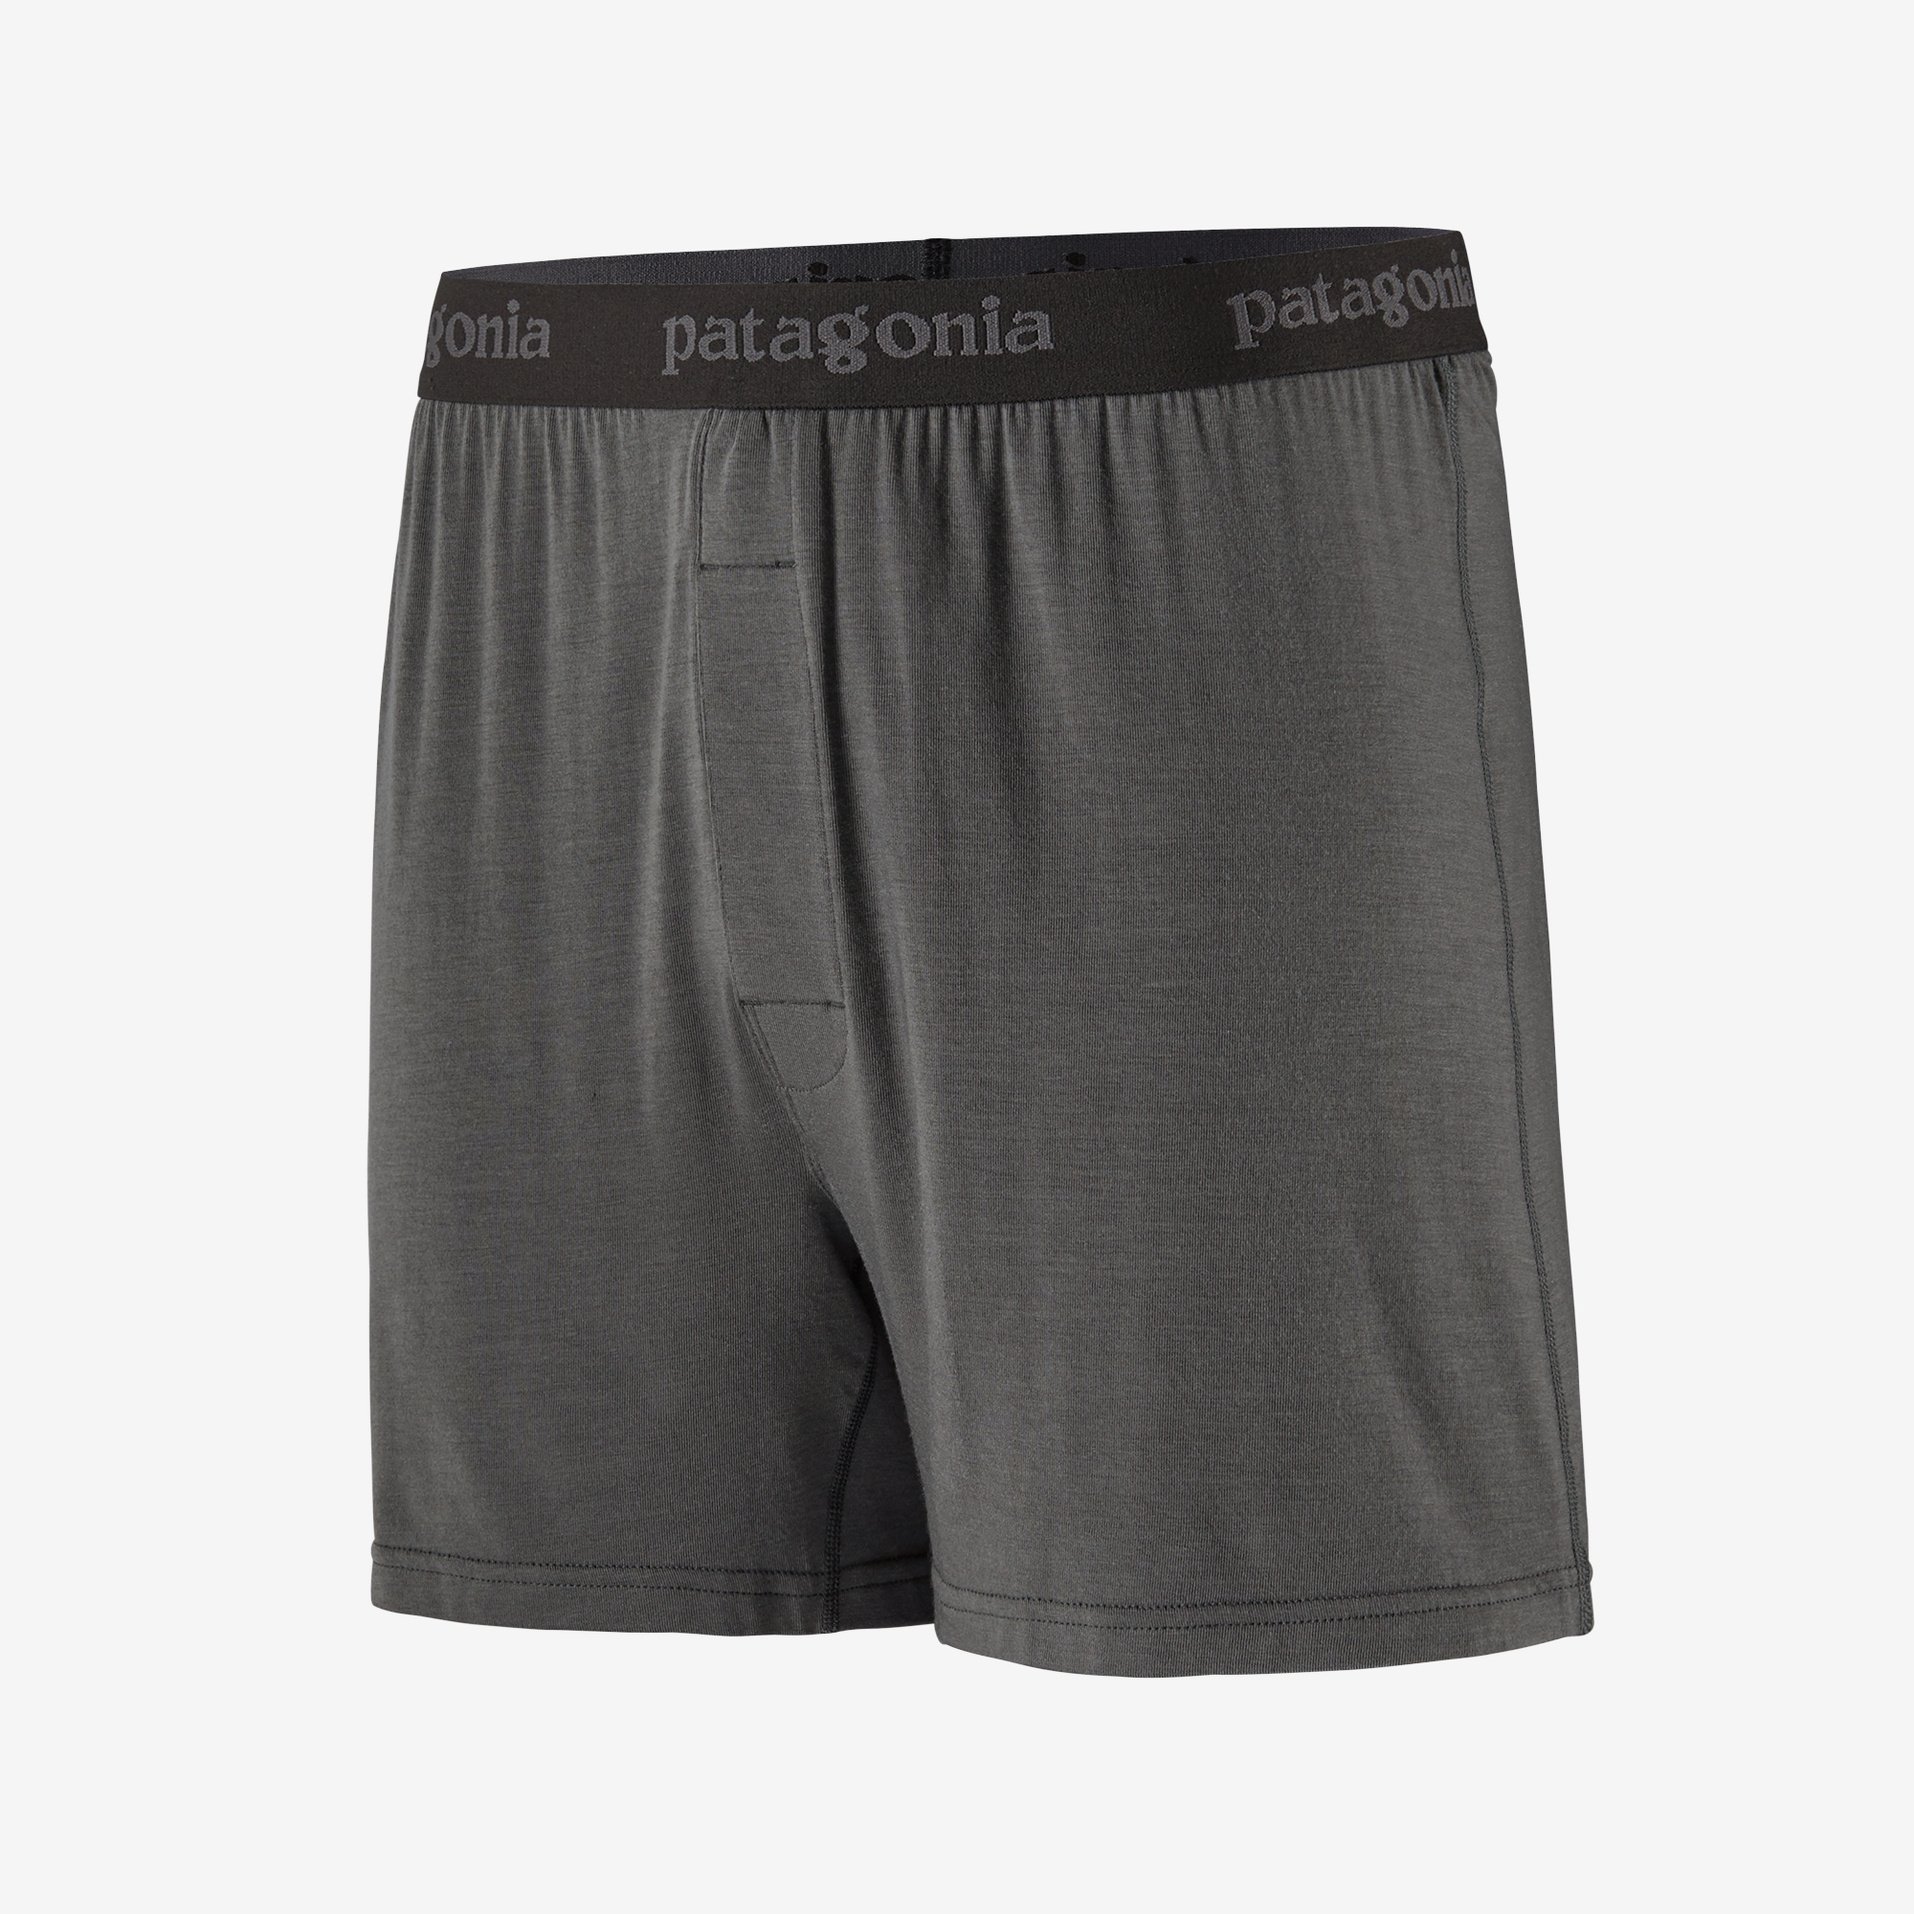 Patagonia Men's Essential Boxers (Size: Extra Large, Color: Faria Multi Small - Ink Black)